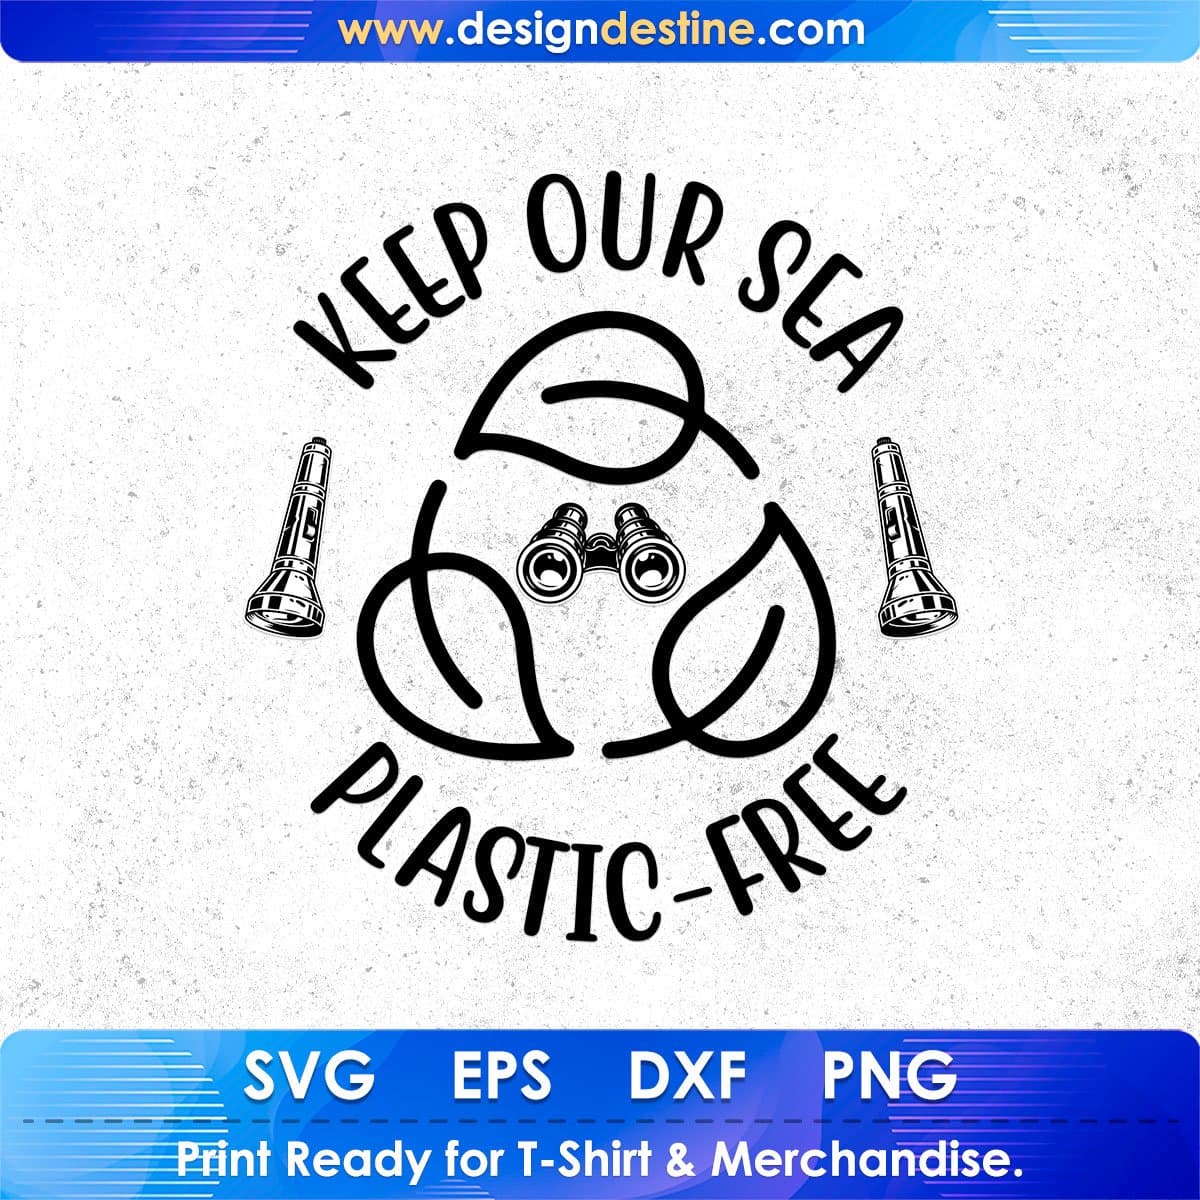 Keep Our Sea Plastic-Free T shirt Design In Svg Png Cutting Printable Files